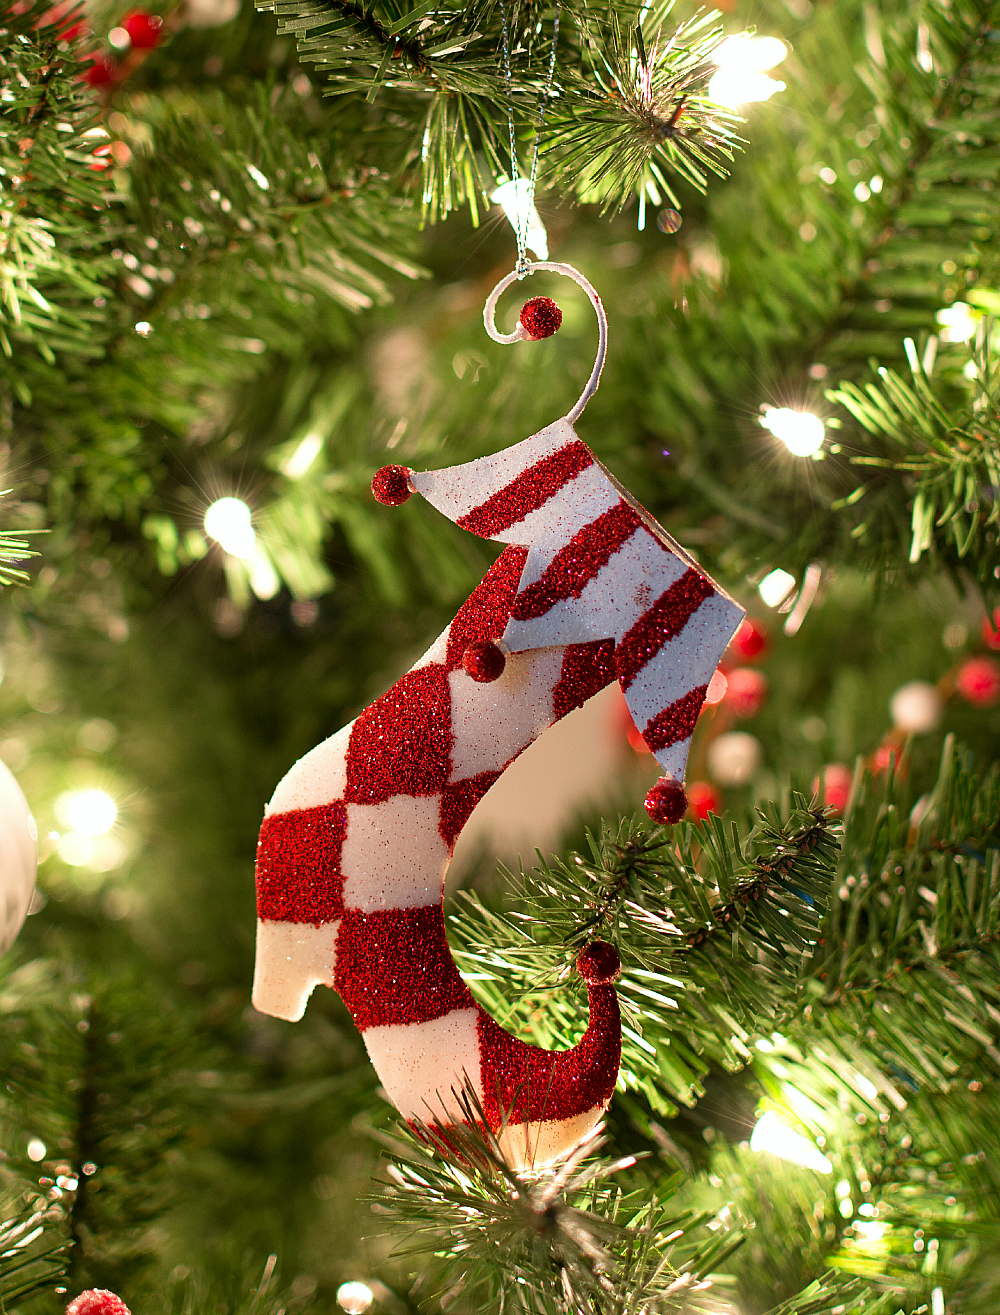 Christmas-Tree-Red-White-Ornaments (6 of 17) 2